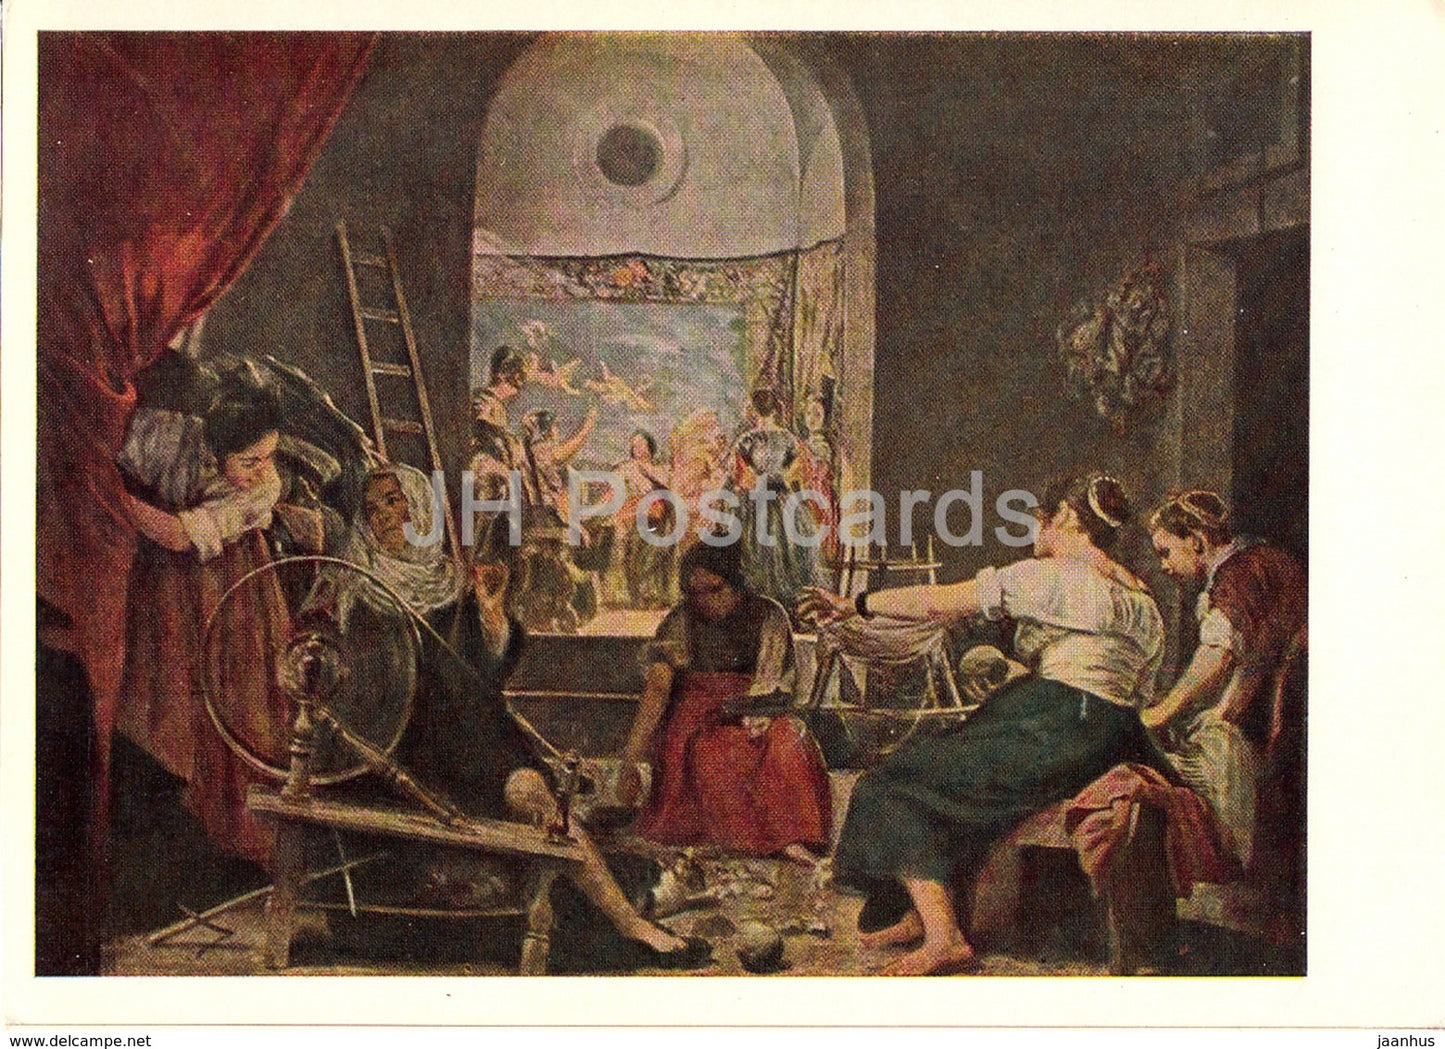 painting by Diego Velazquez - Spinners - Spinning Wheel - Spanish art - 1966 - Russia USSR - unused - JH Postcards